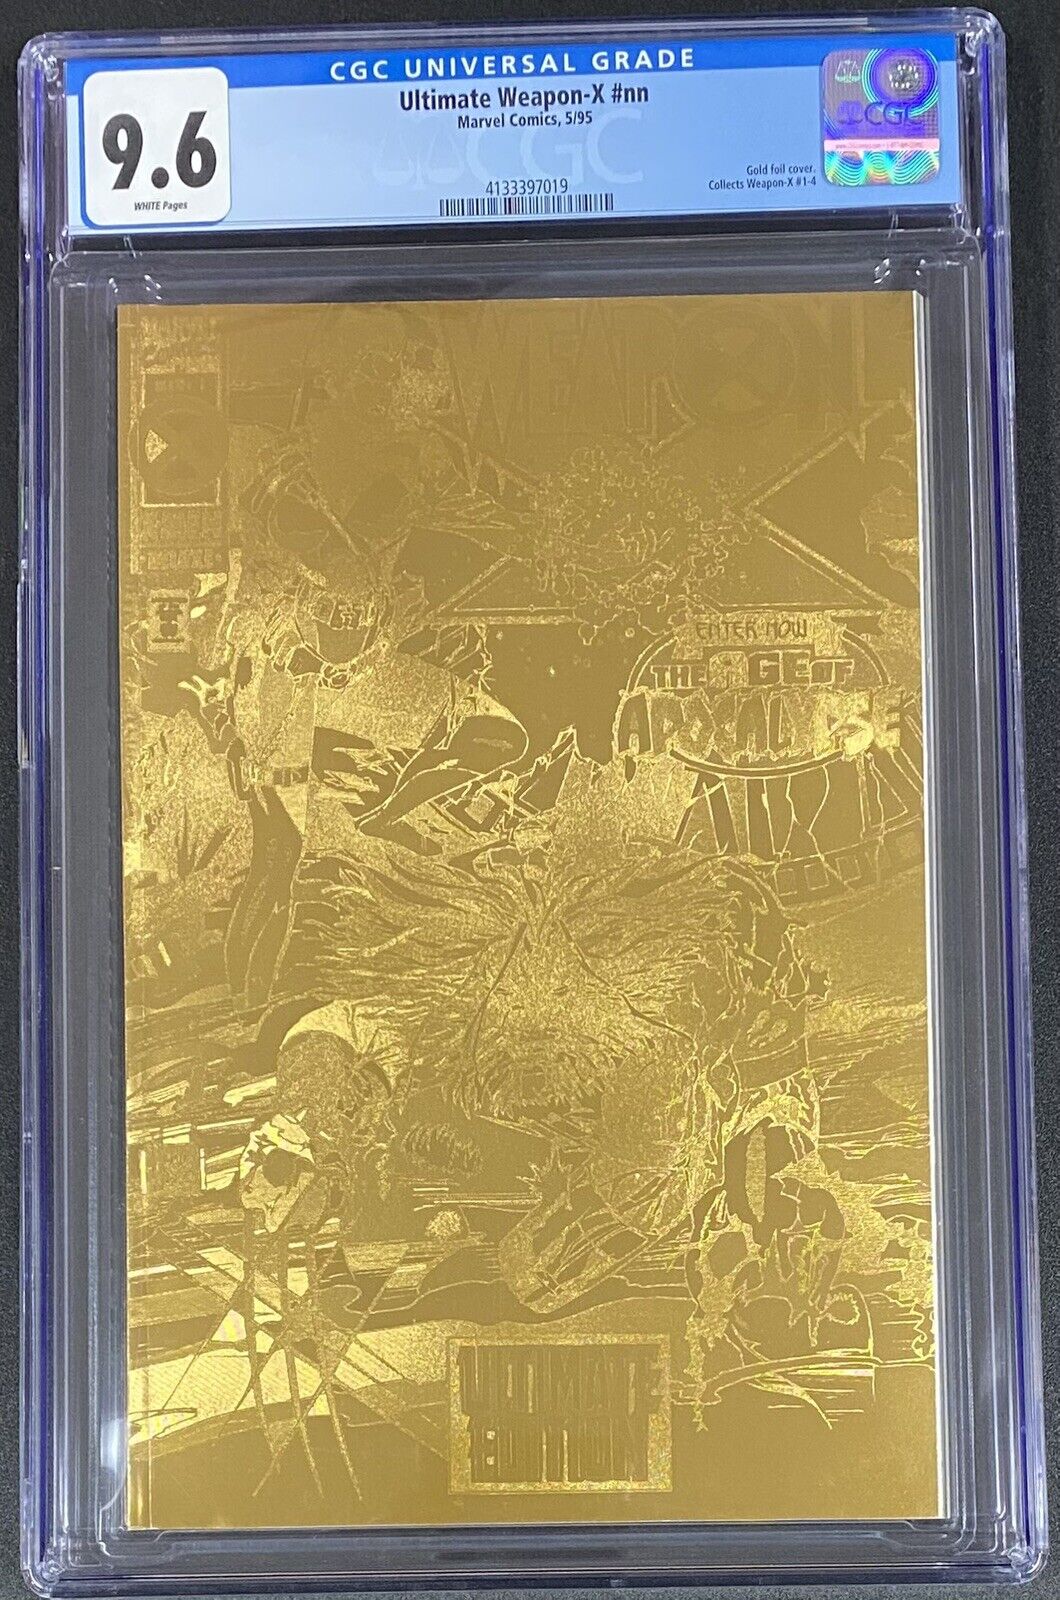 Ultimate Weapon X #1 Gold Foil Cover #1-4 collection CGC 9.6 NM+ Rare